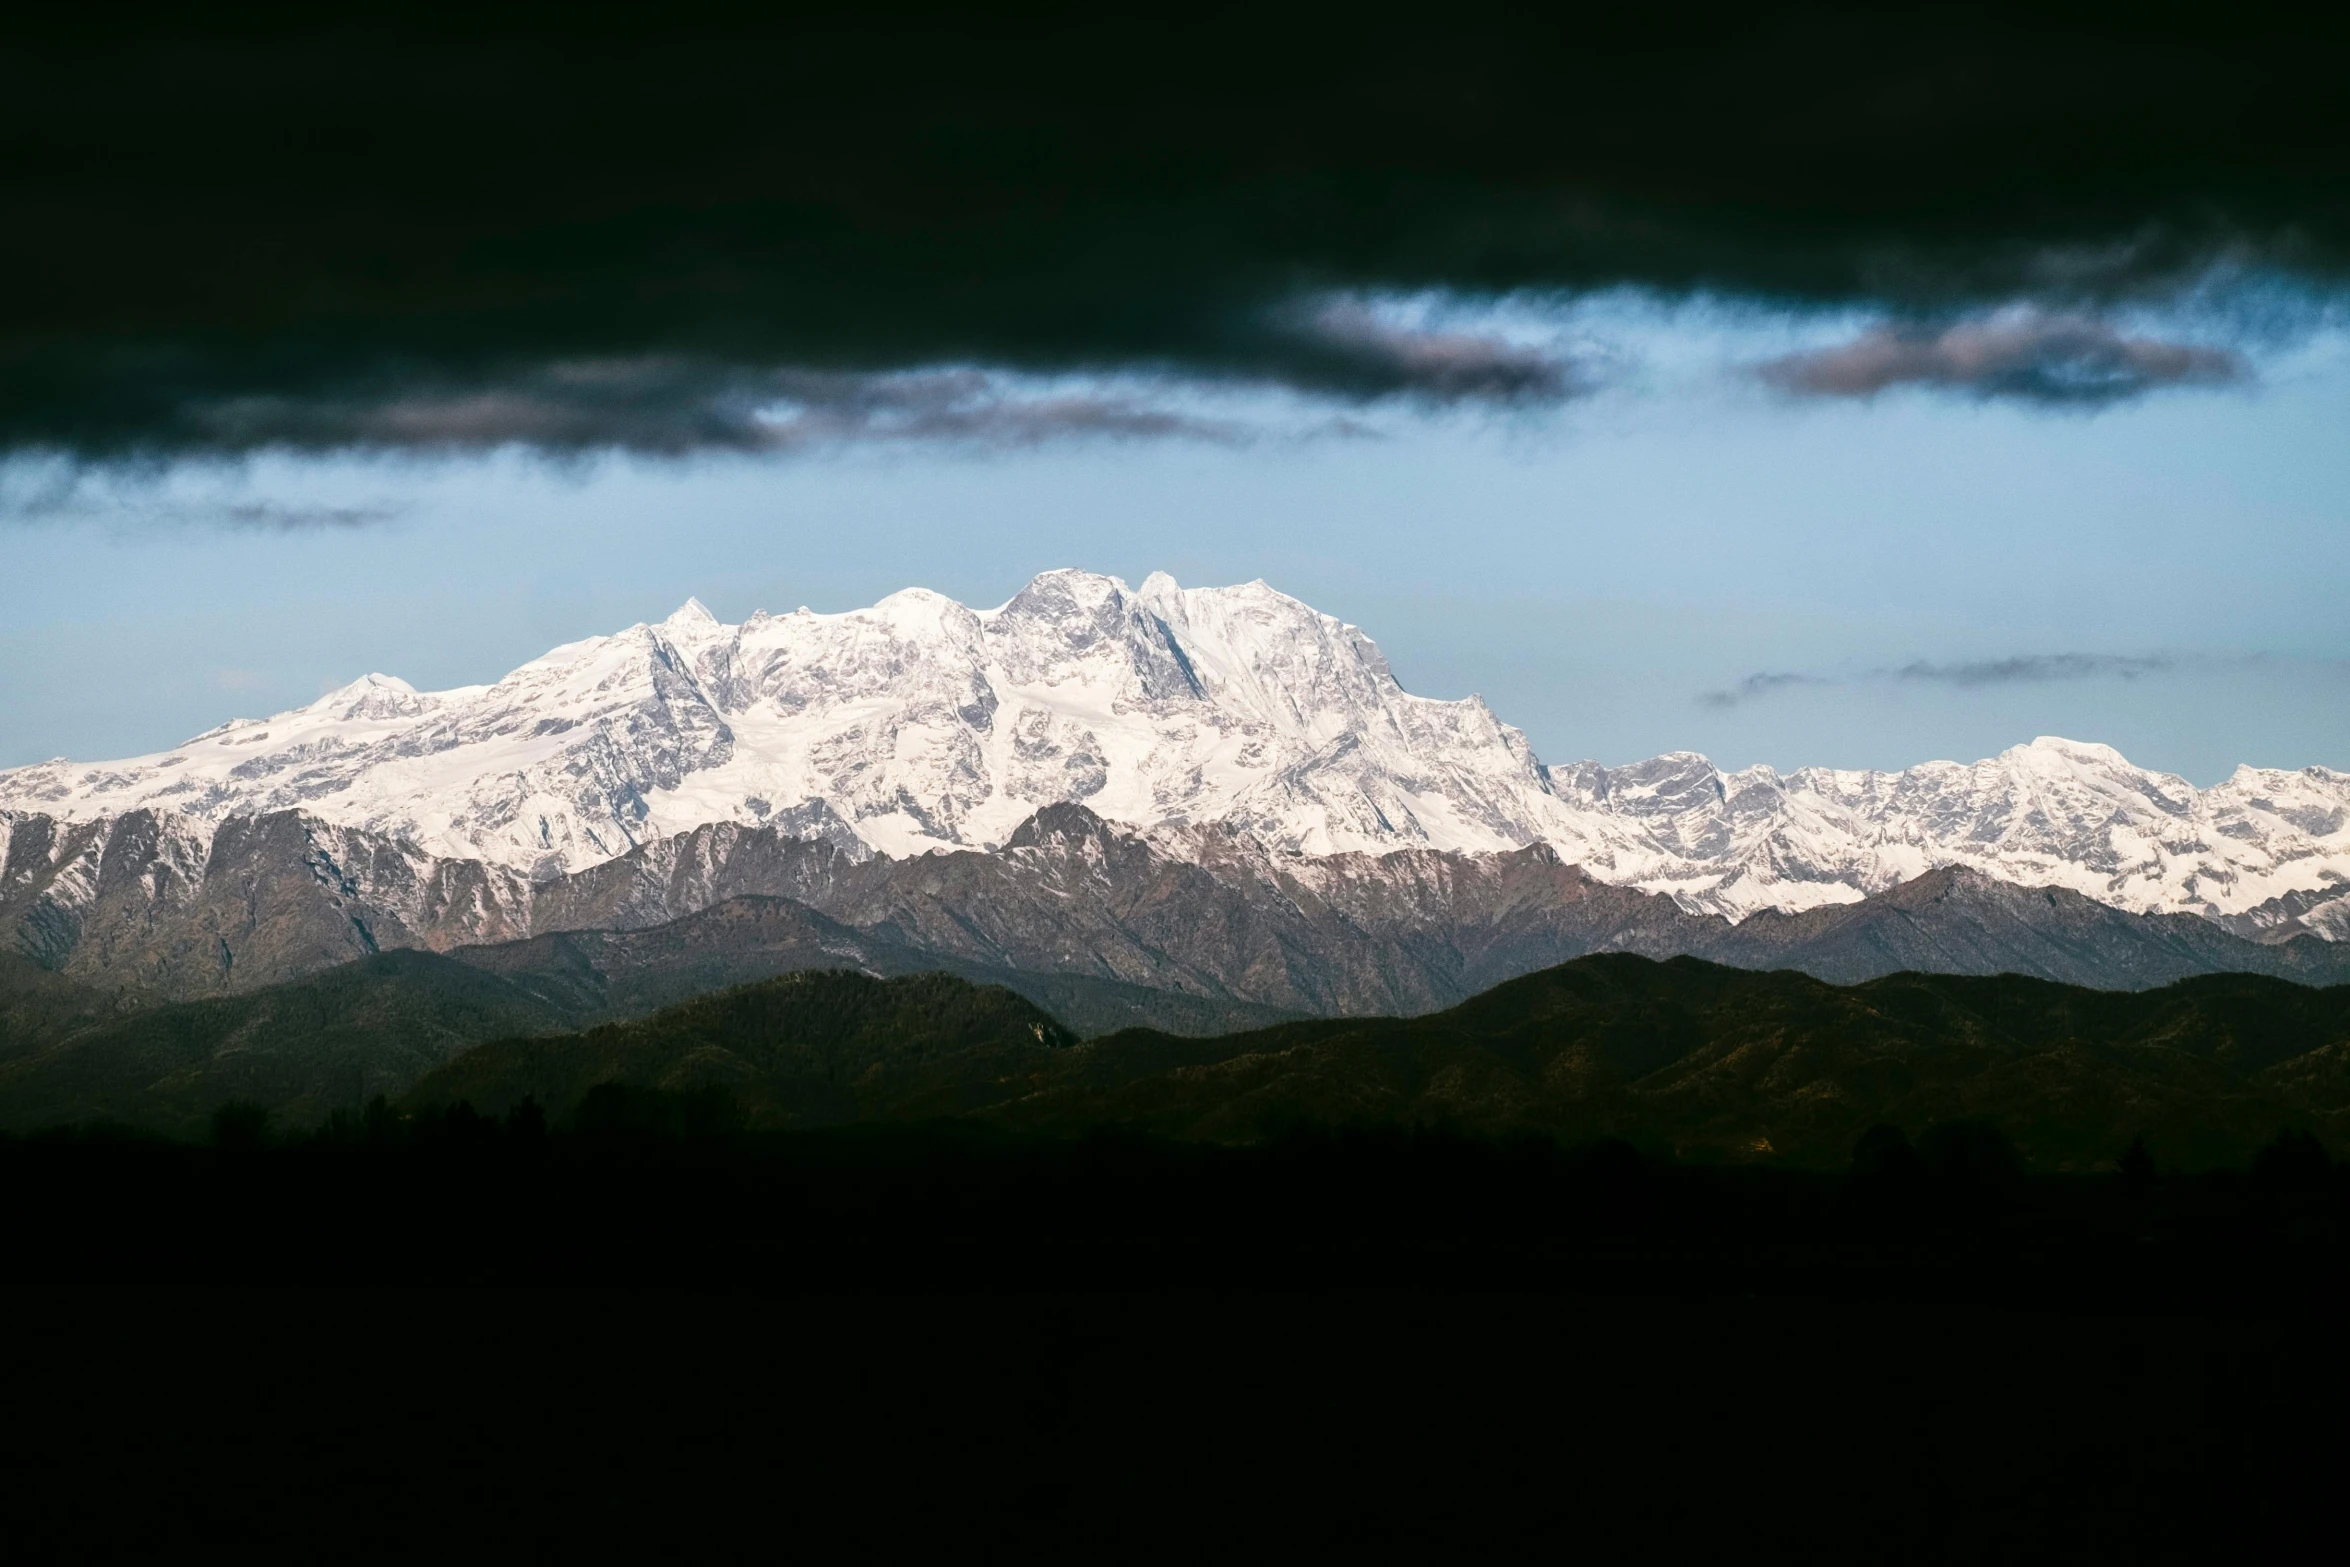 a mountain covered in snow under a cloudy sky, a portrait, unsplash contest winner, romanticism, uttarakhand, multiple stories, distant mountains lights photo